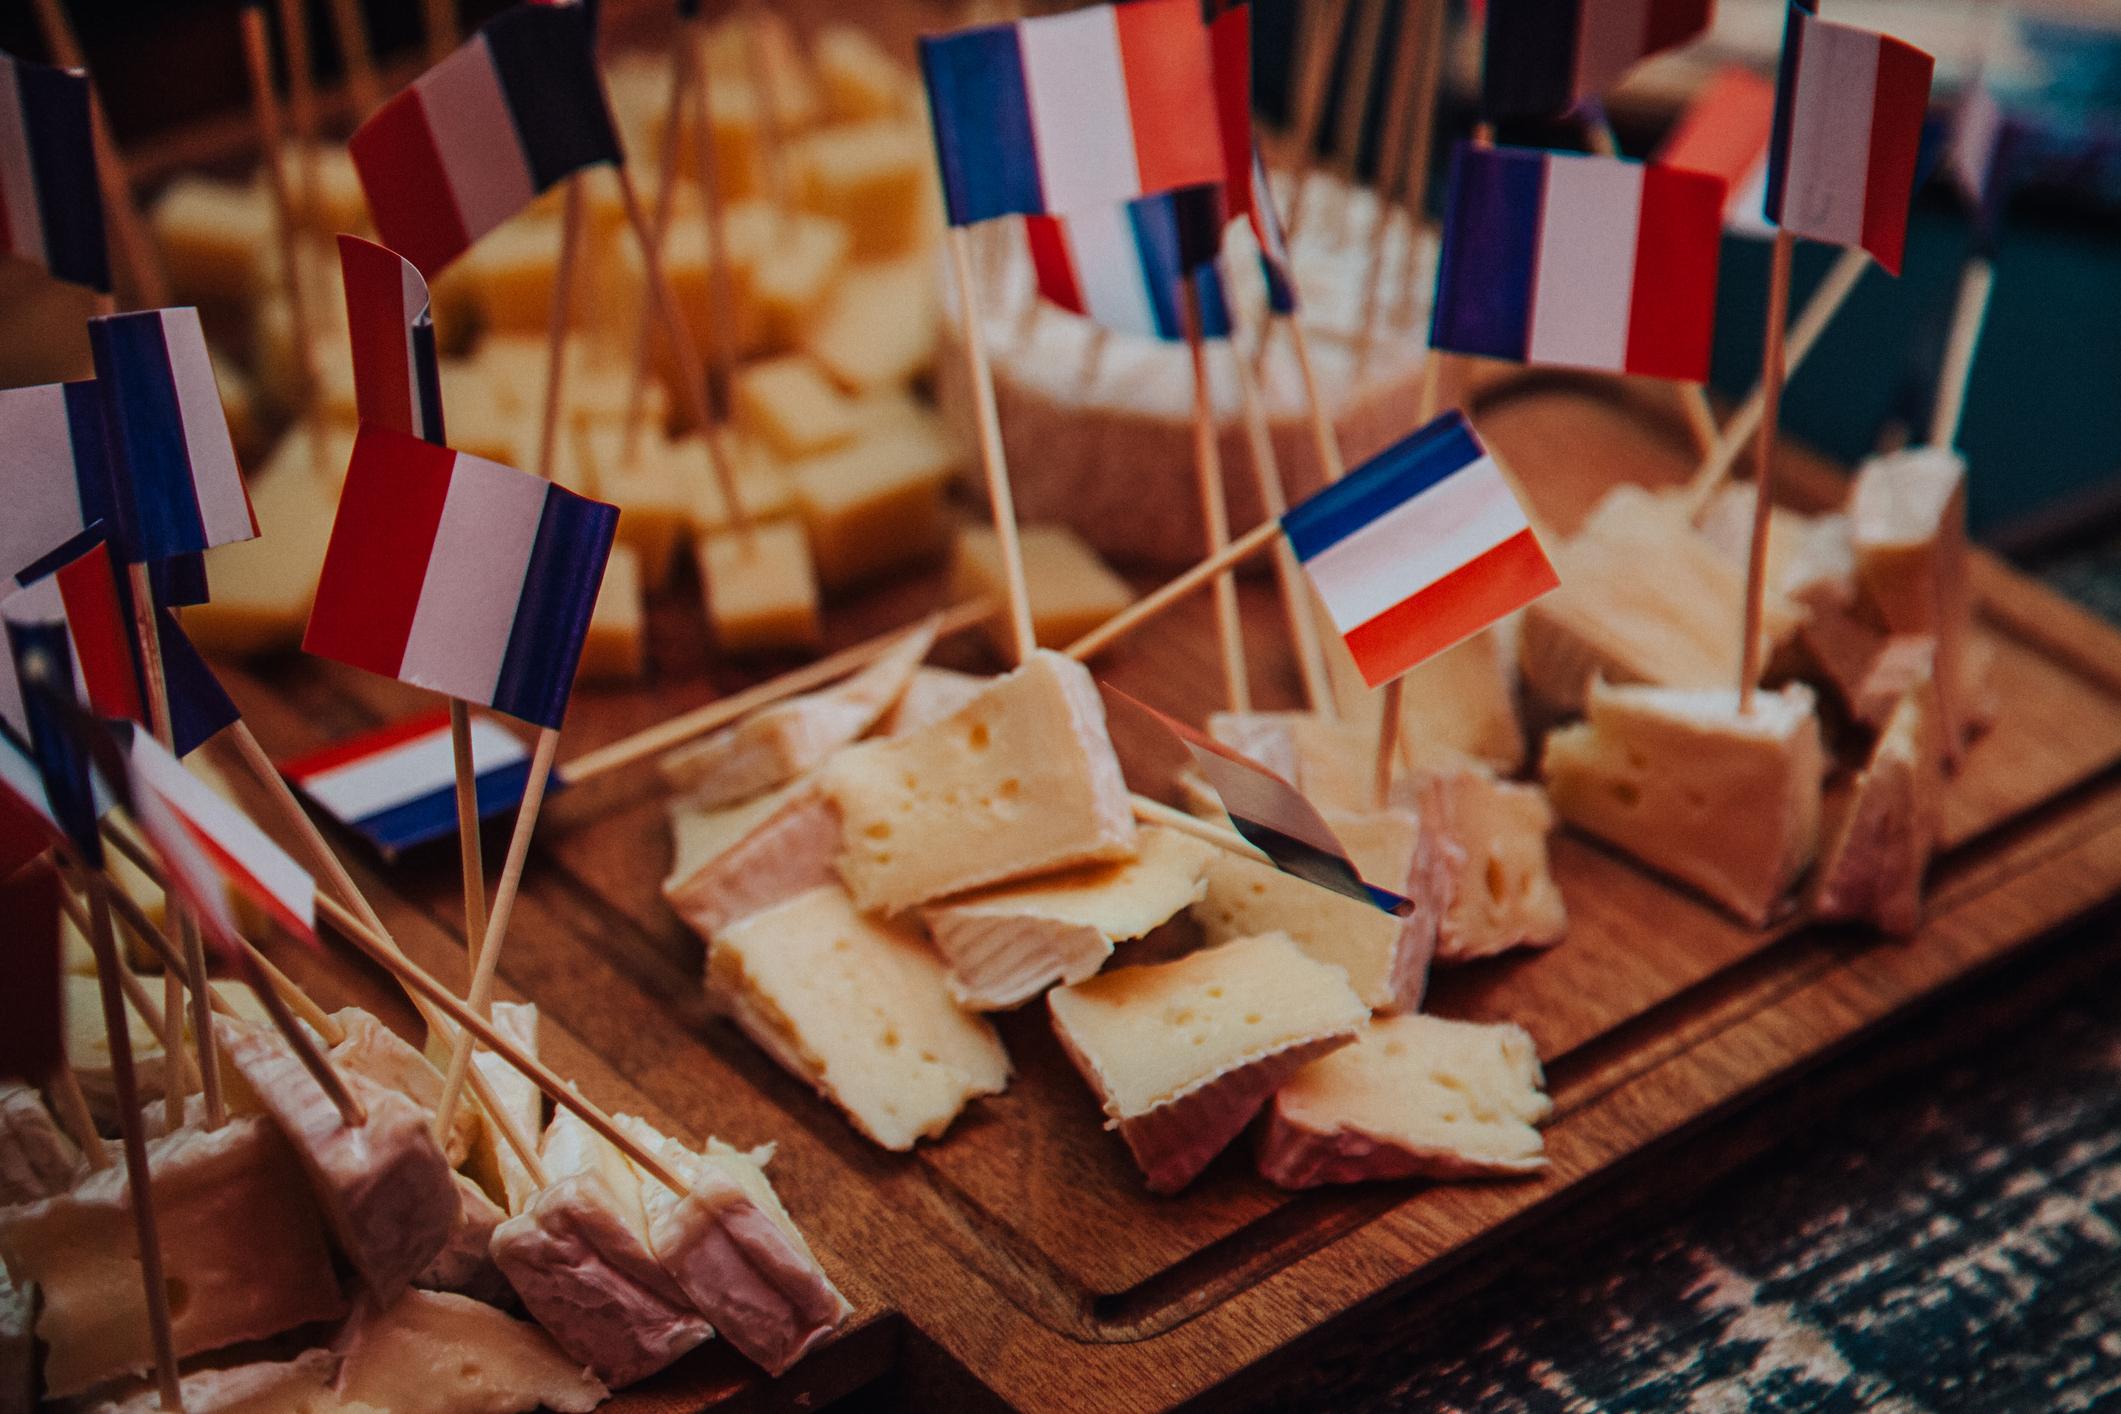 French cheese is among products set to get pricier